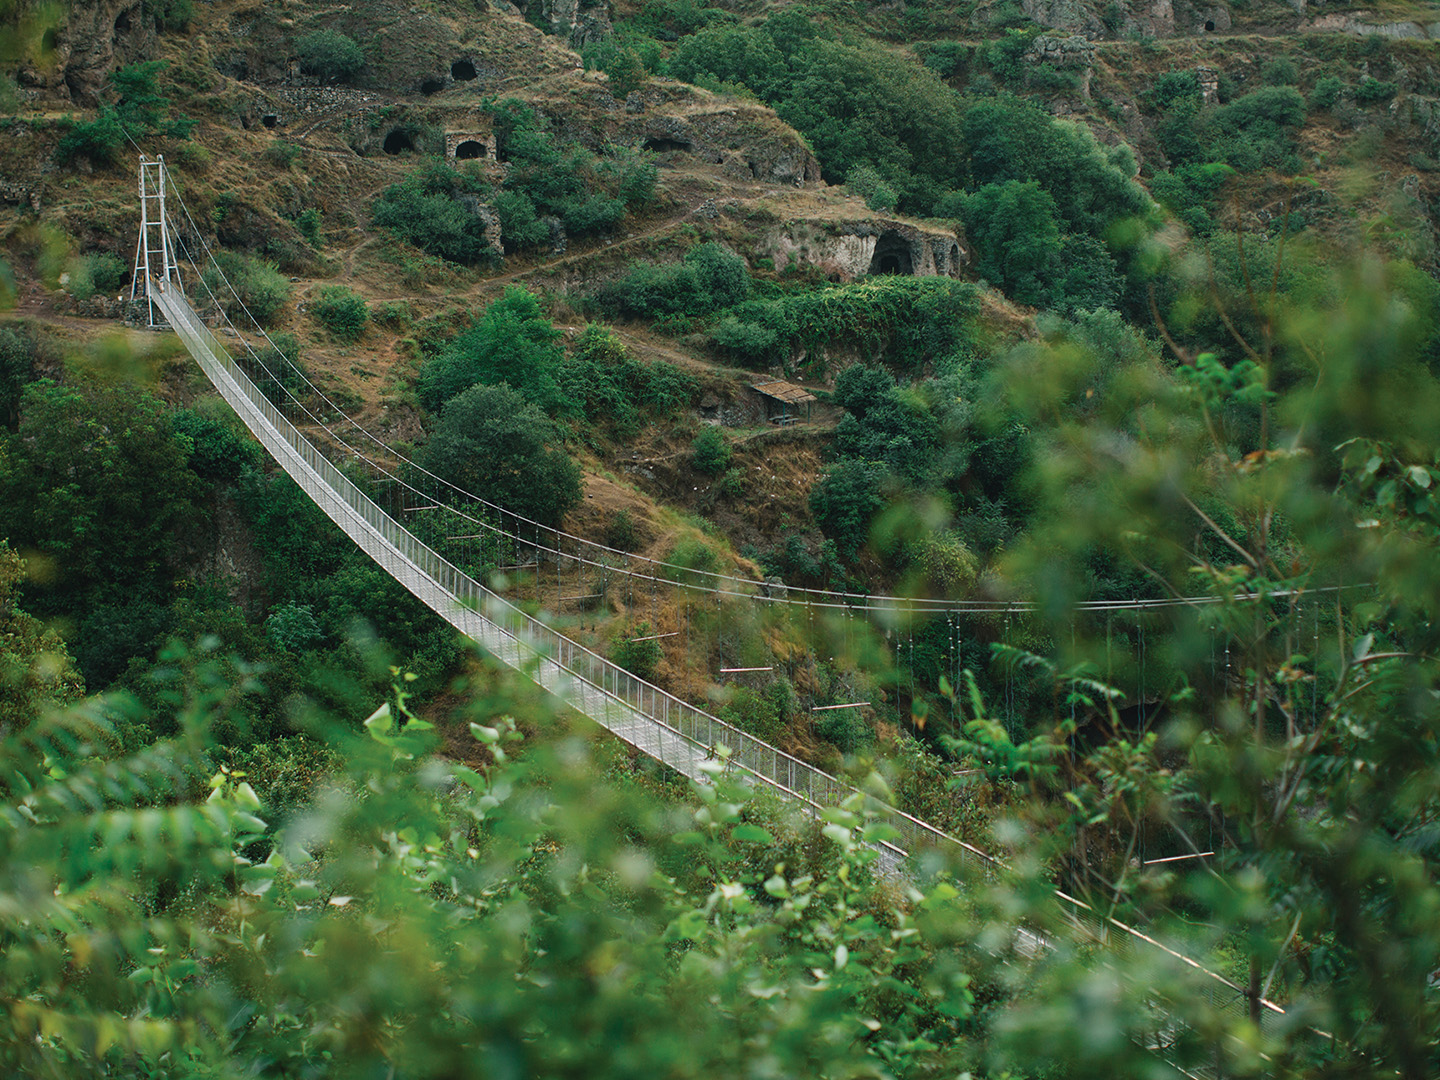 The swinging bridge in Khndzoresk connects ancient history with the modern world.